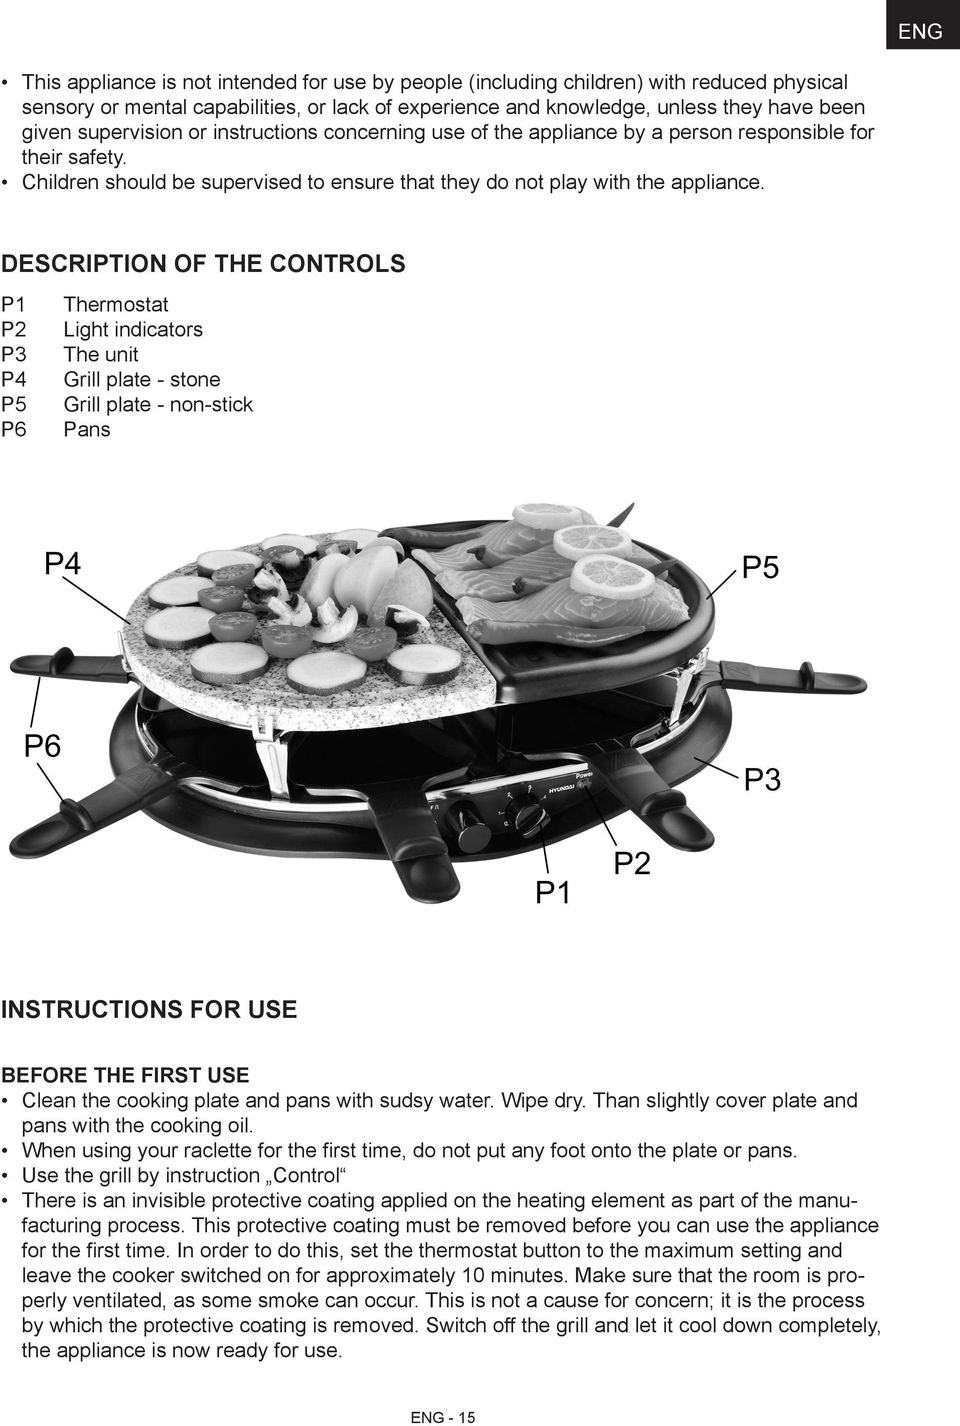 DESCRIPTION OF THE CONTROLS P1 P2 P3 P4 P5 P6 Thermostat Light indicators The unit Grill plate - stone Grill plate - non-stick Pans INSTRUCTIONS FOR USE BEFORE THE FIRST USE Clean the cooking plate